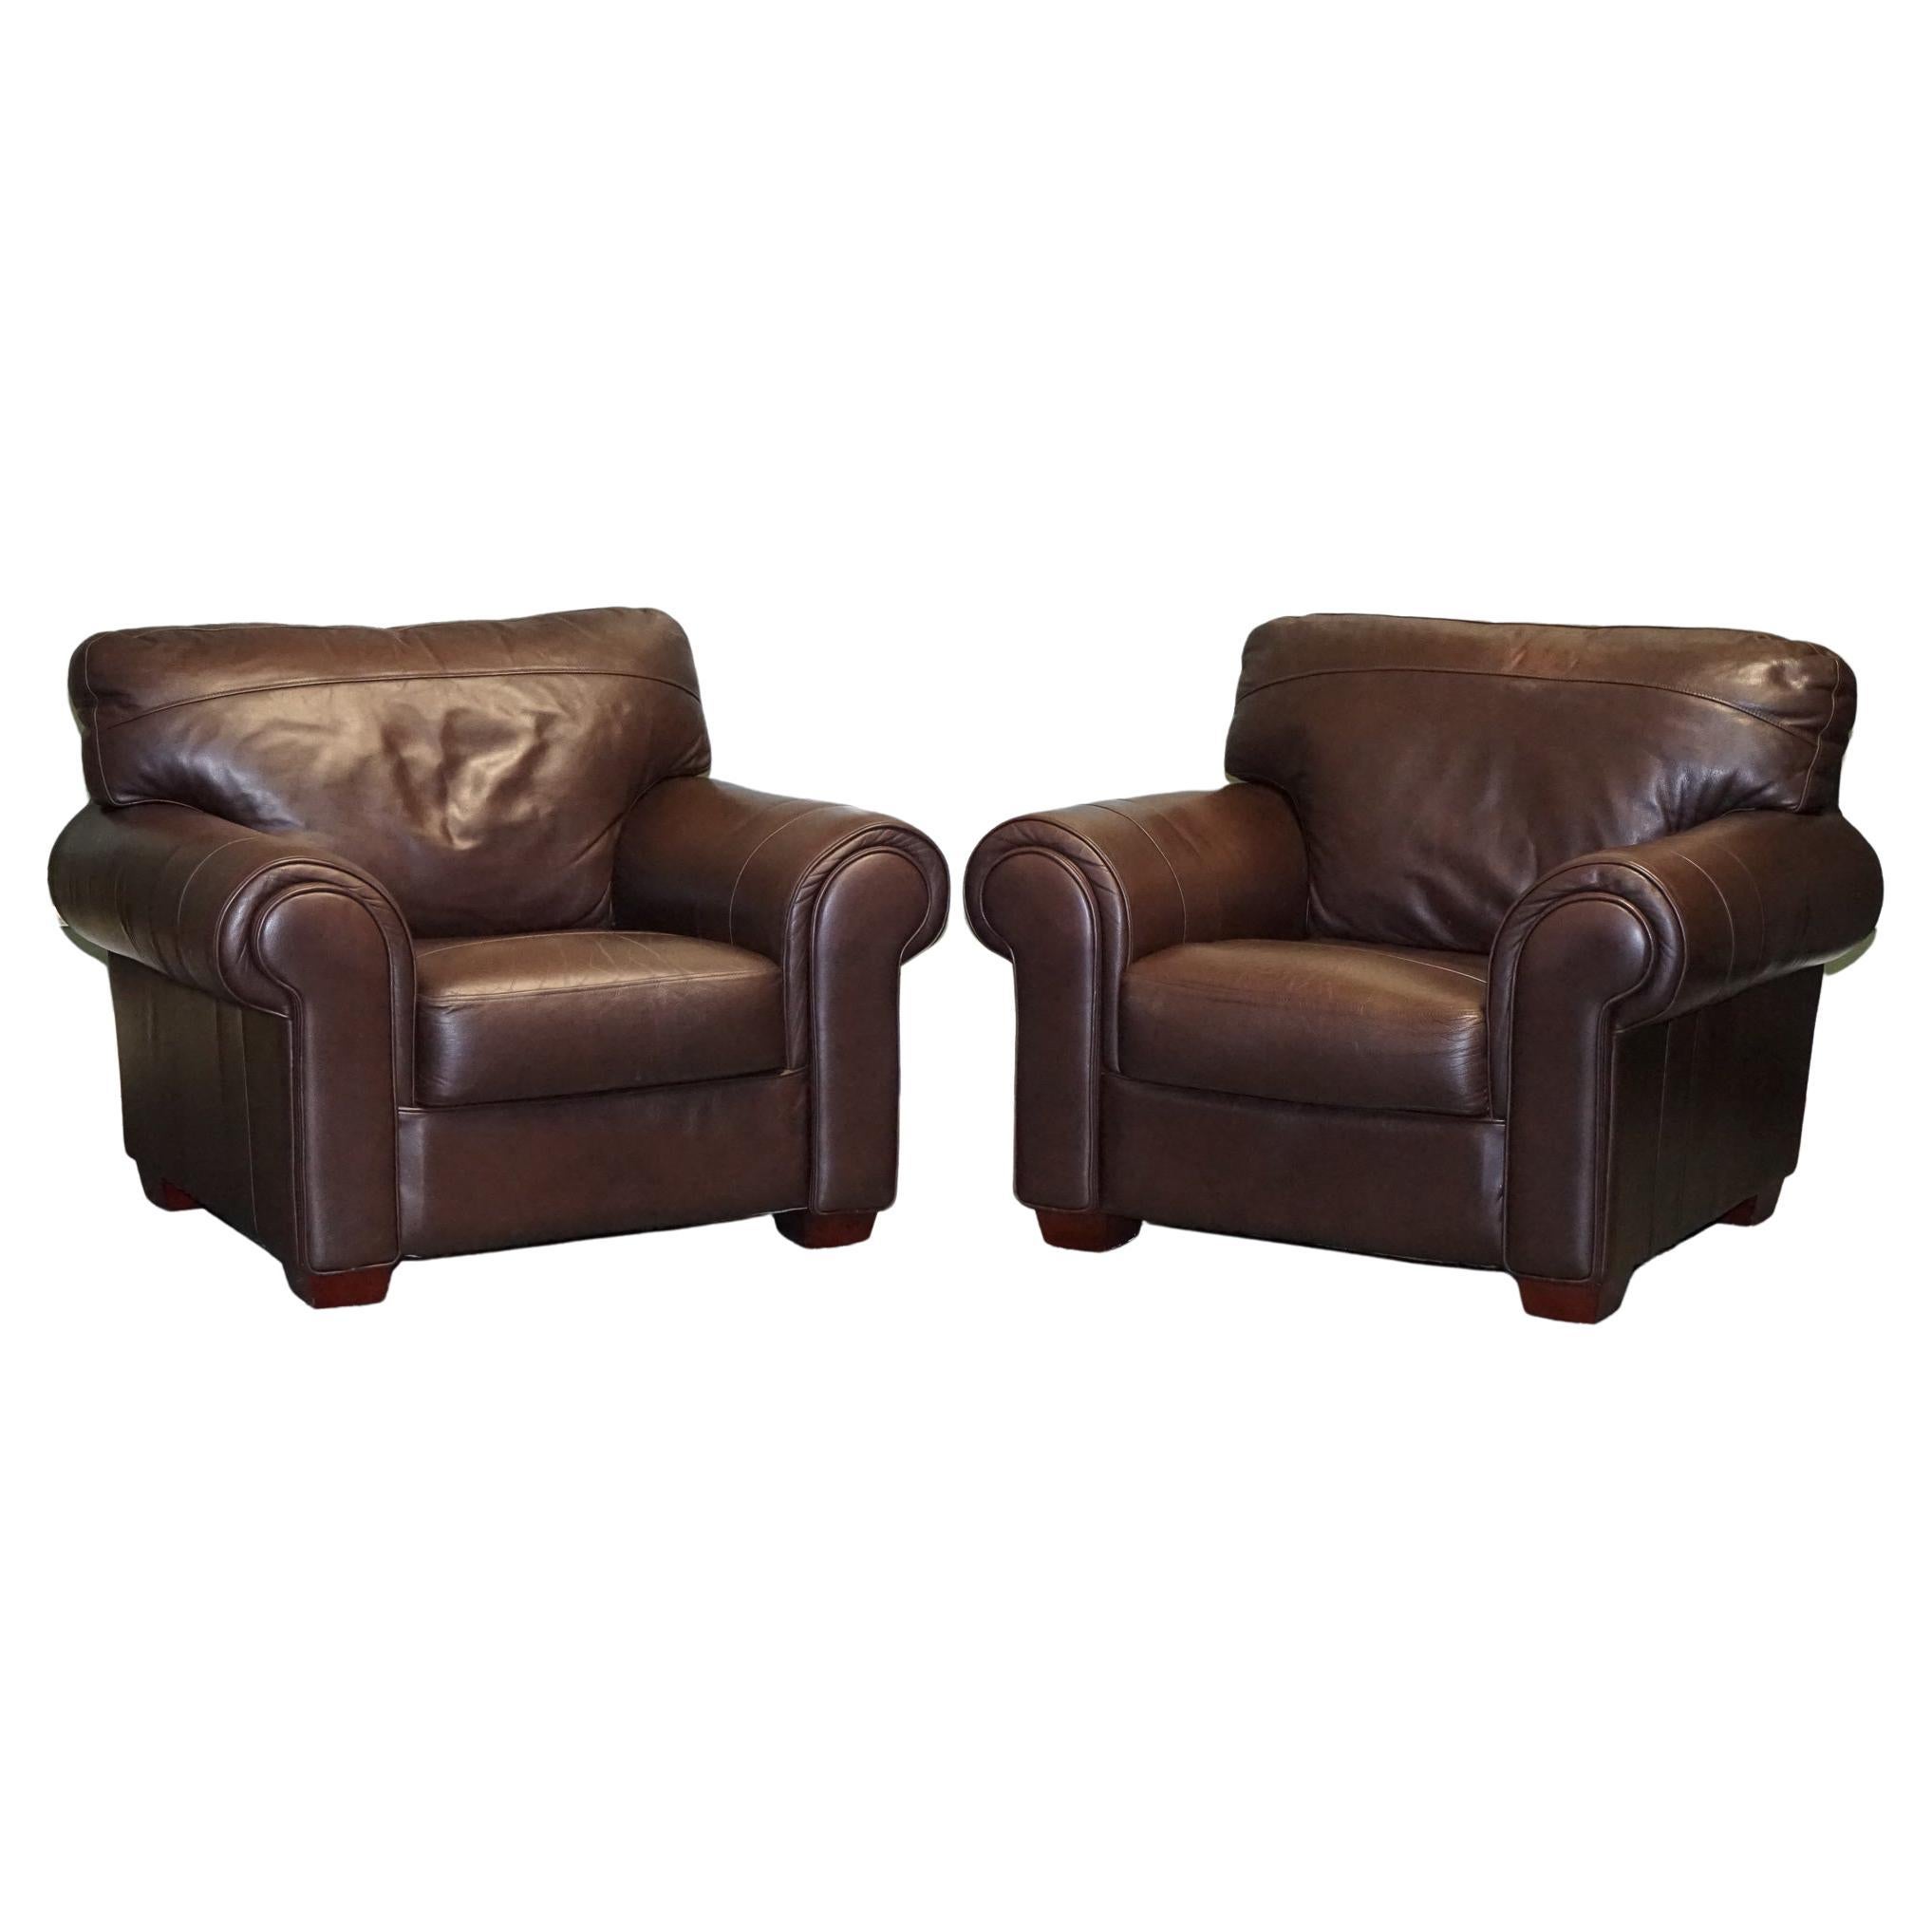 PAIR OF LARGE COMFORTable BROWN LEATHER ARMCHAIRS, MATCHiNG SOFA VERKAUFT SELTEN